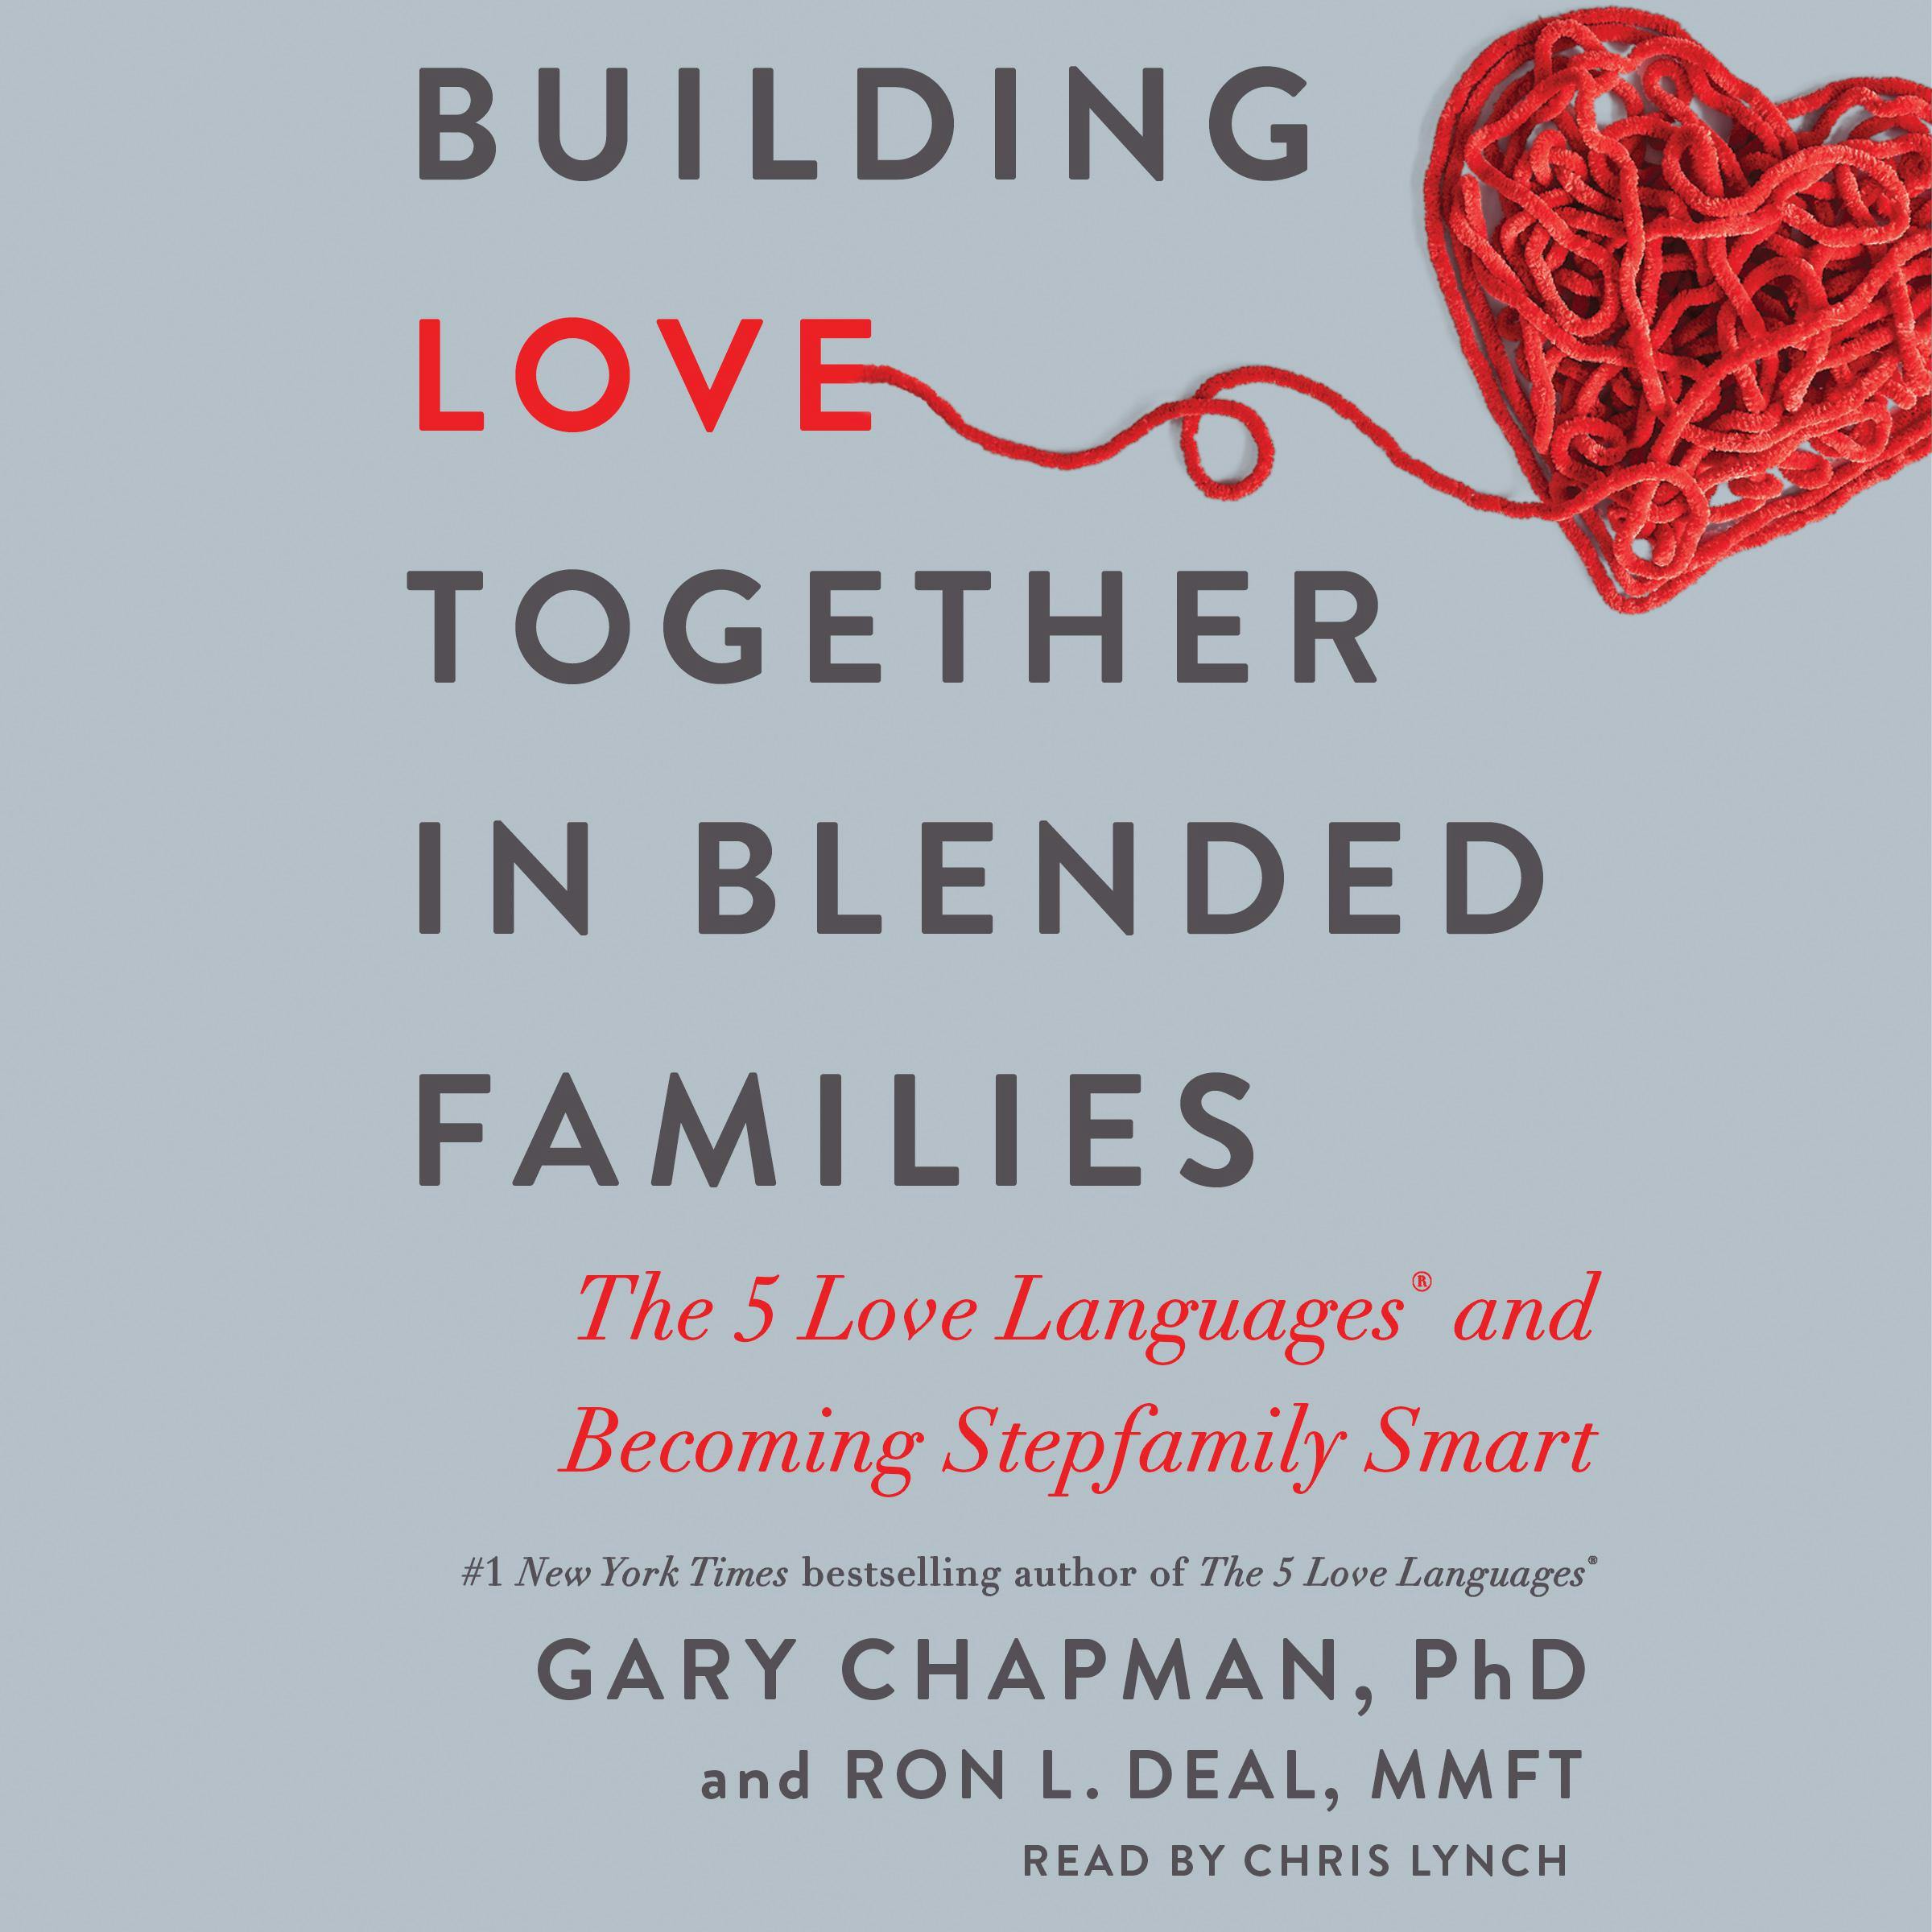 Building Love Together in Blended Families: The 5 Love Languages and Becoming Stepfamily Smart - Ron L Deal, Gary Chapman